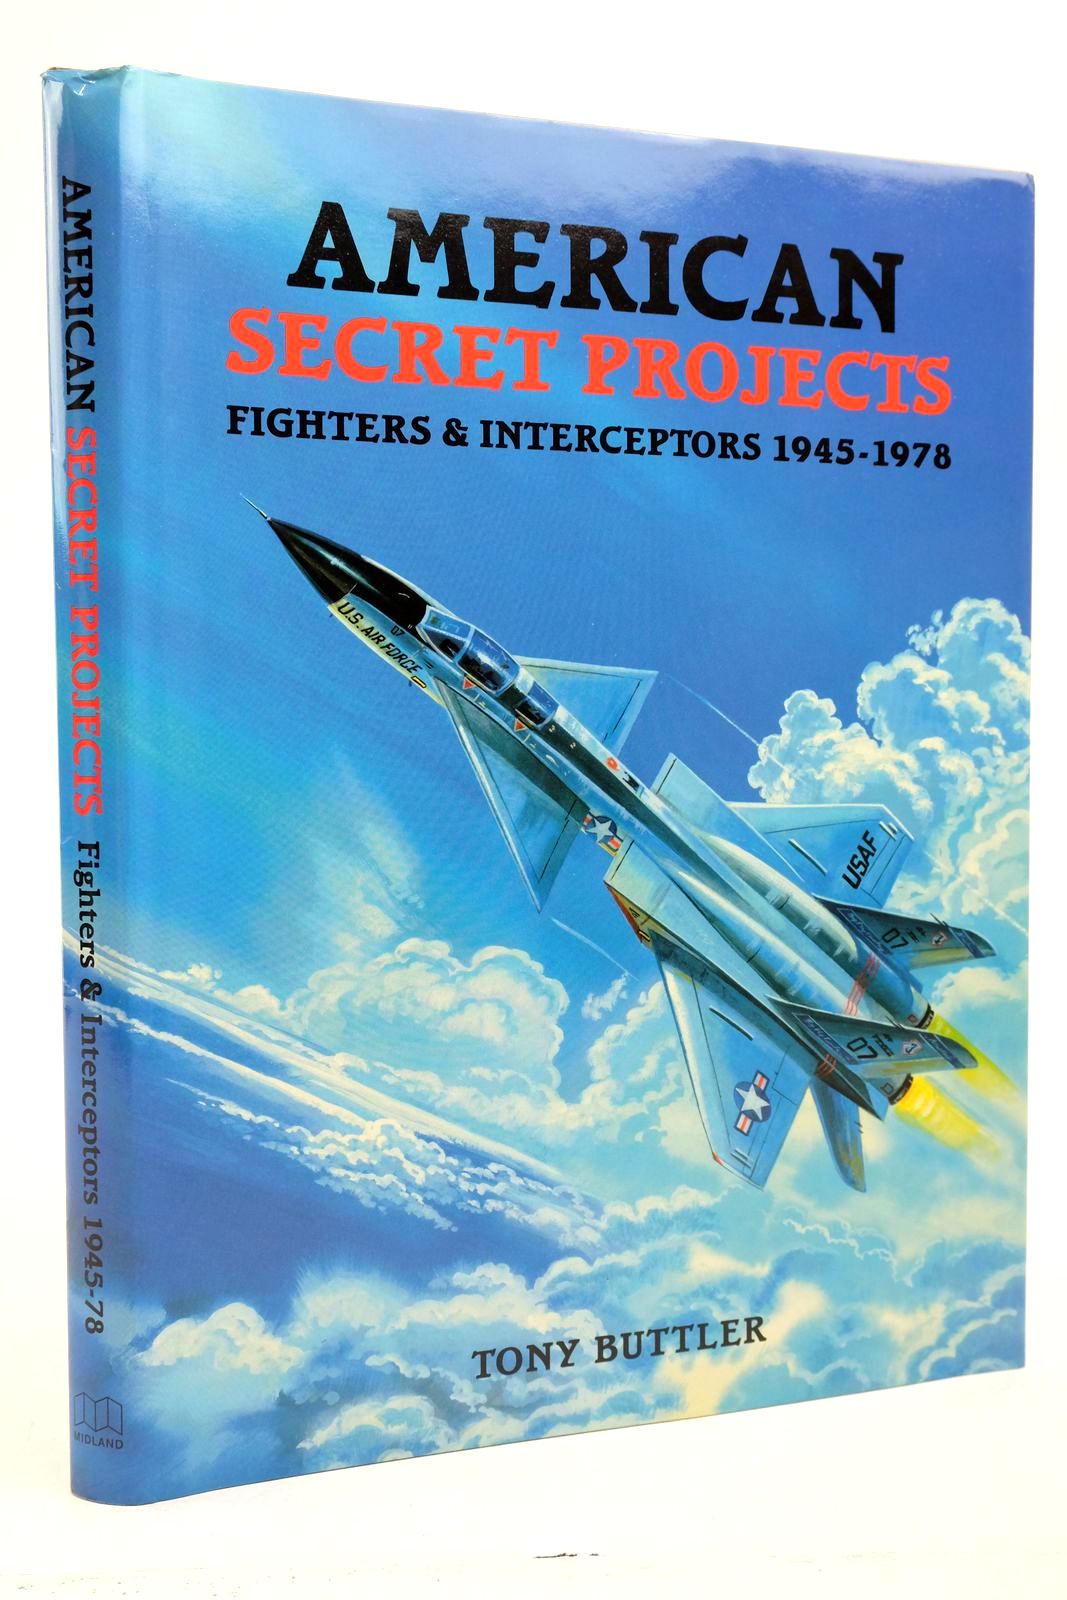 Photo of AMERICAN SECRET PROJECTS: FIGHTERS & INTERCEPTORS 1945-1978 written by Buttler, Tony published by Midland (STOCK CODE: 2139704)  for sale by Stella & Rose's Books